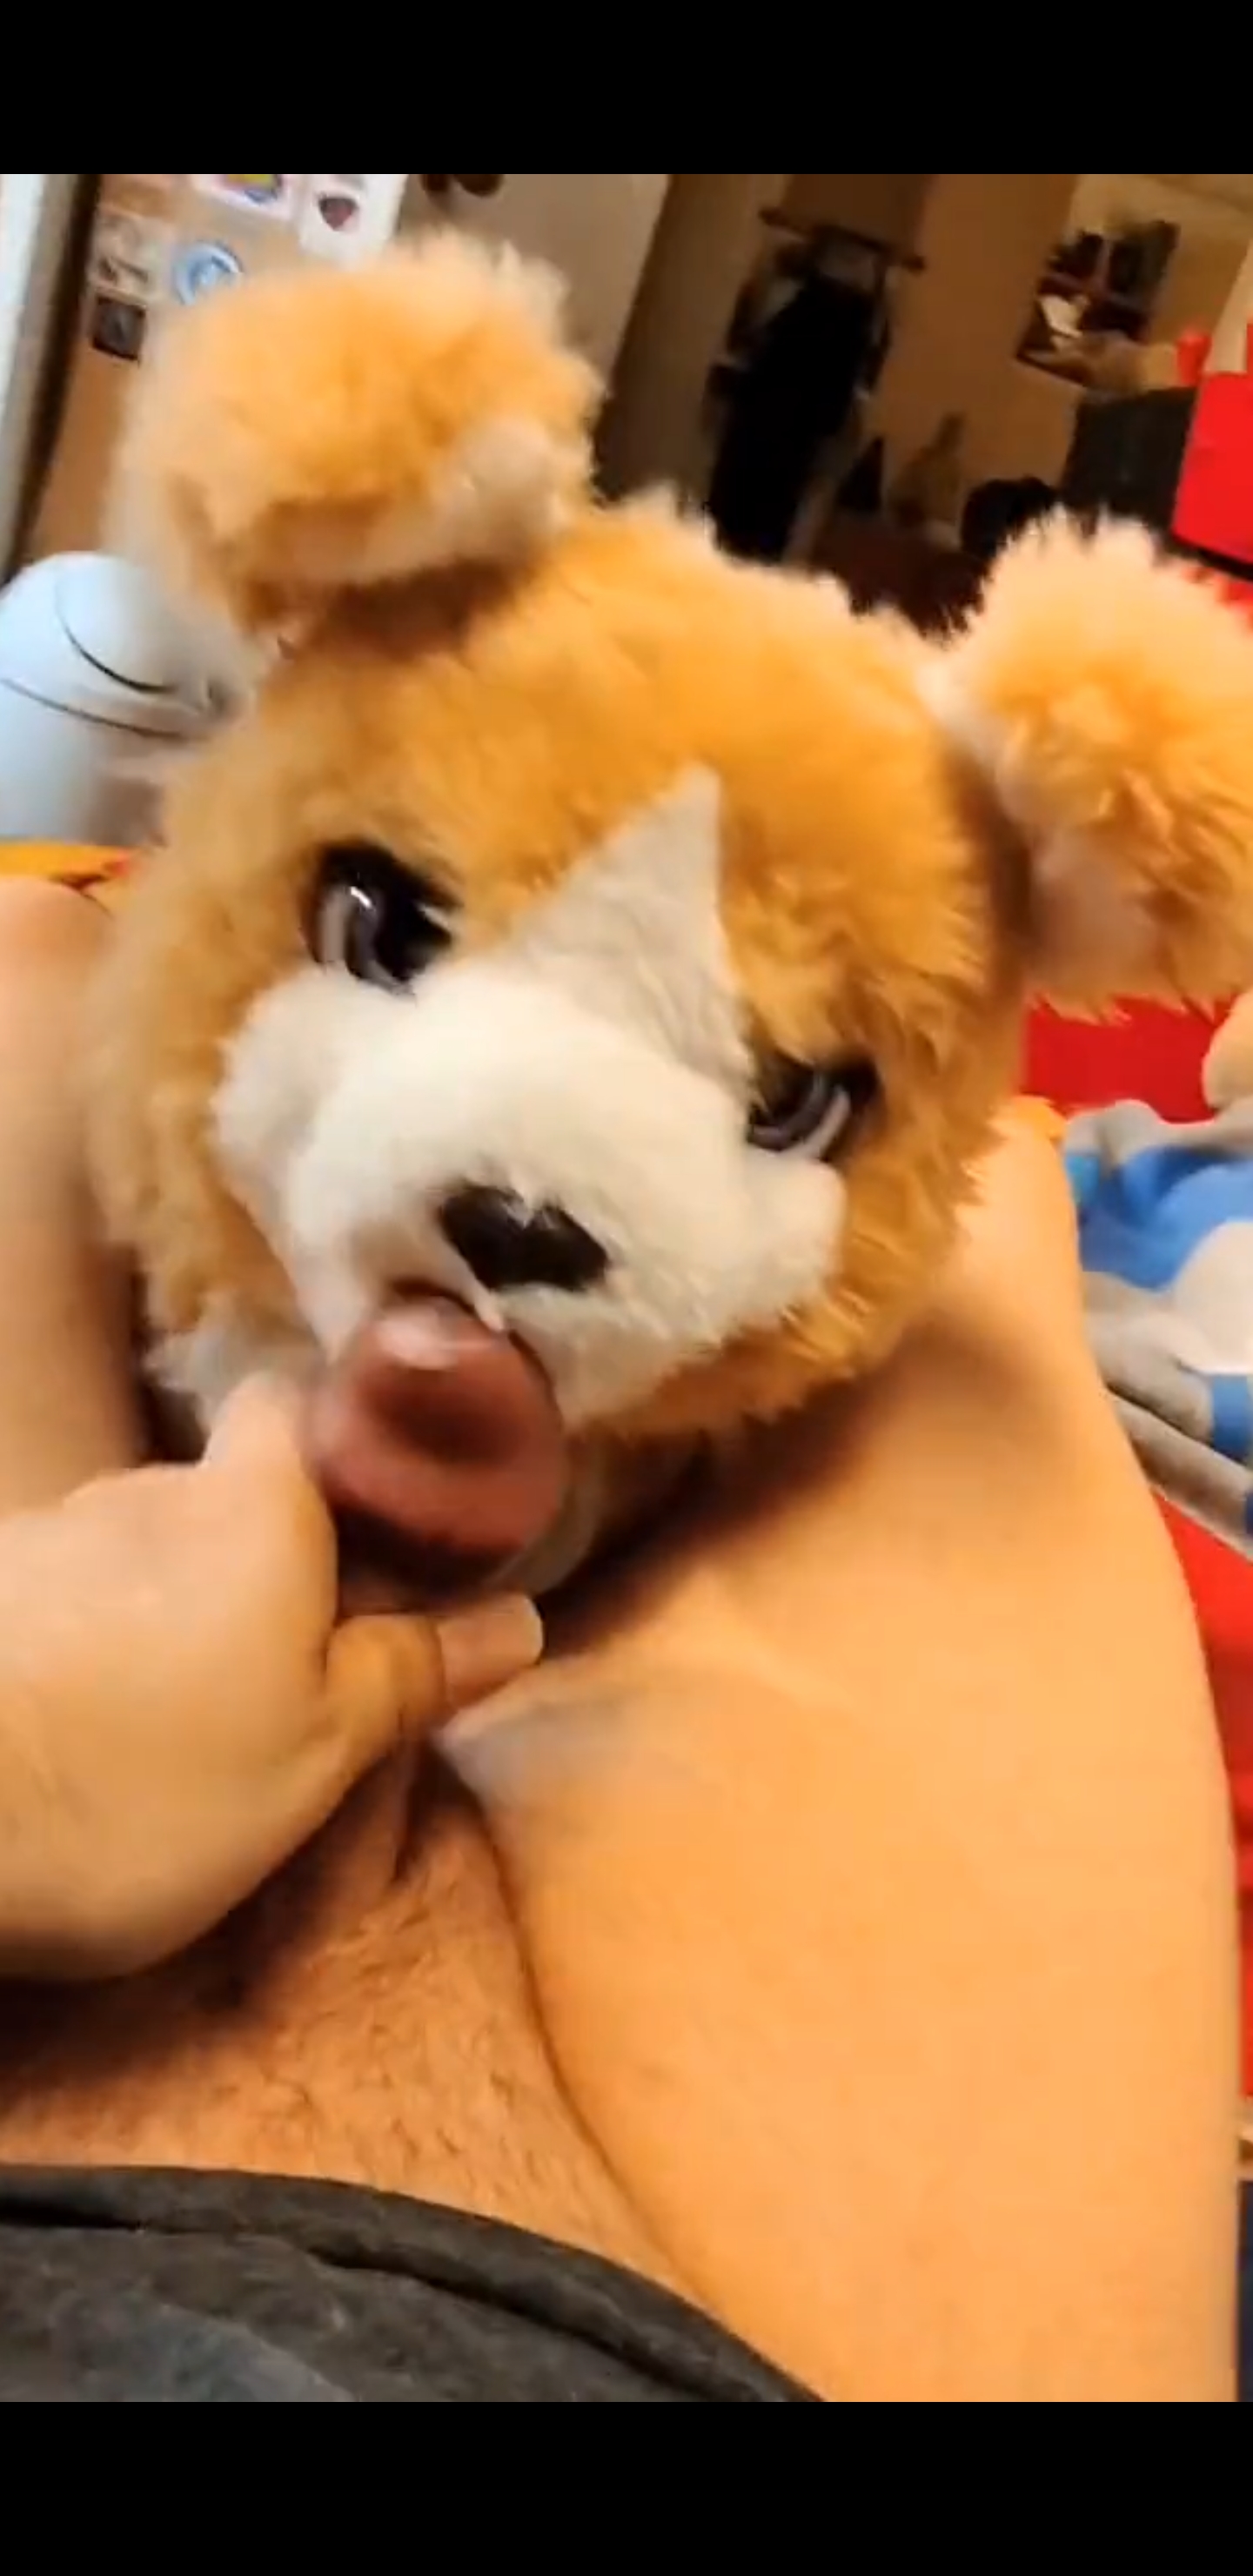 Diaperboy gets head from animatronic puppy